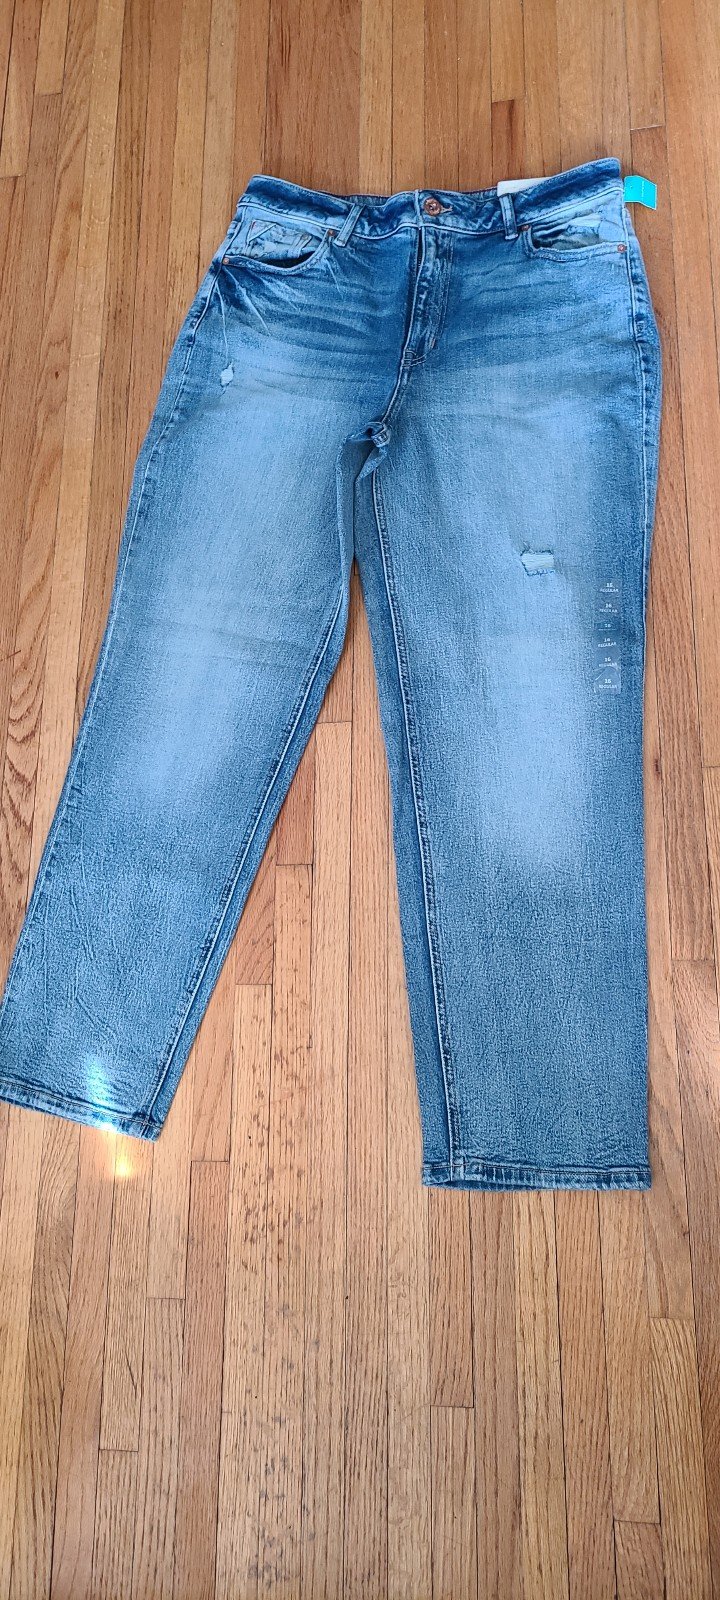 The Best Seller NWT EDGELY JEANS BY MAURICES,  16 REGUL